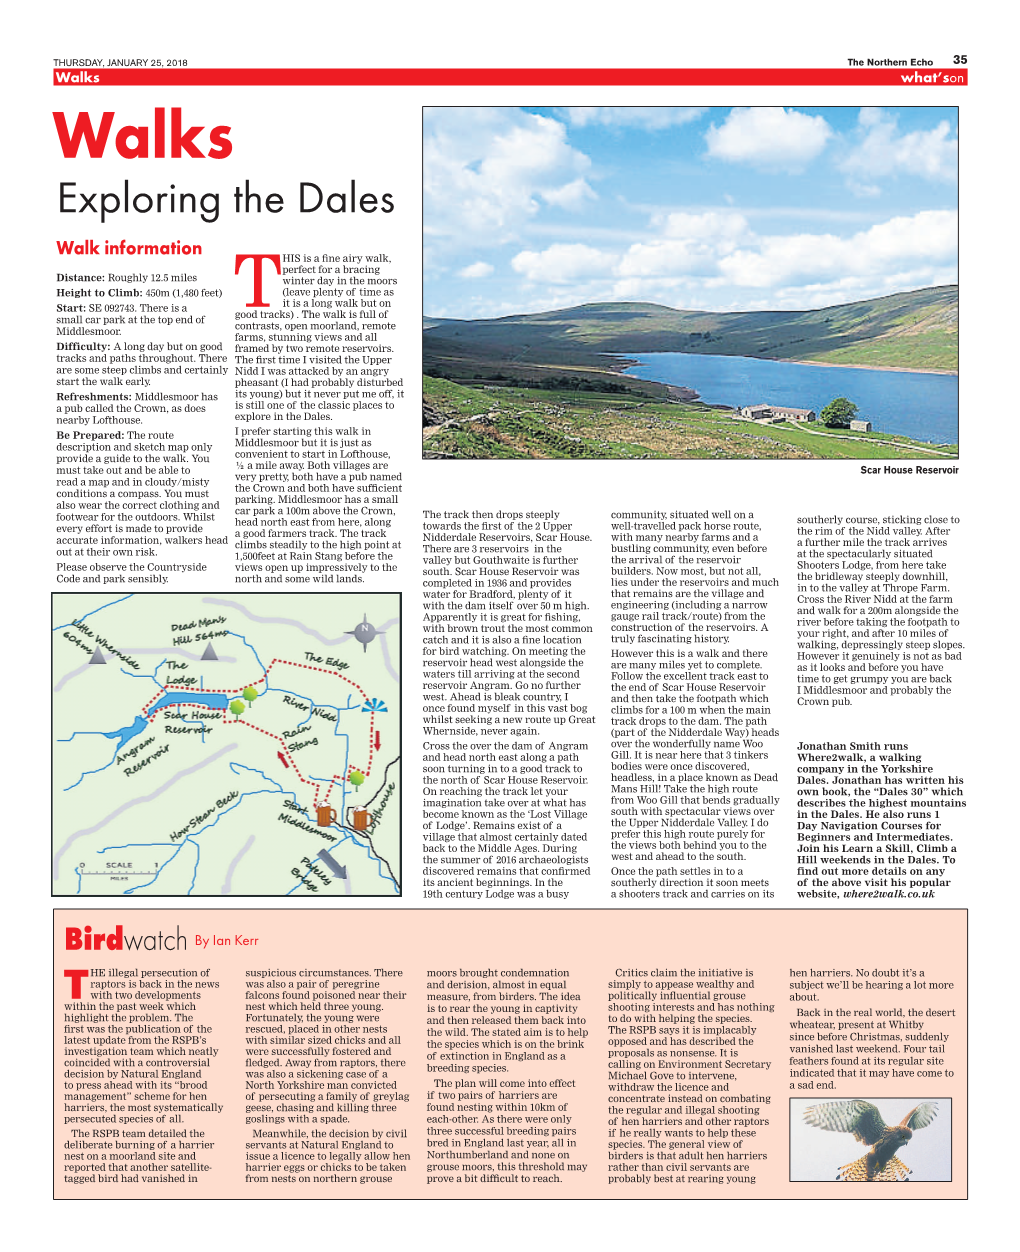 Exploring the Dales